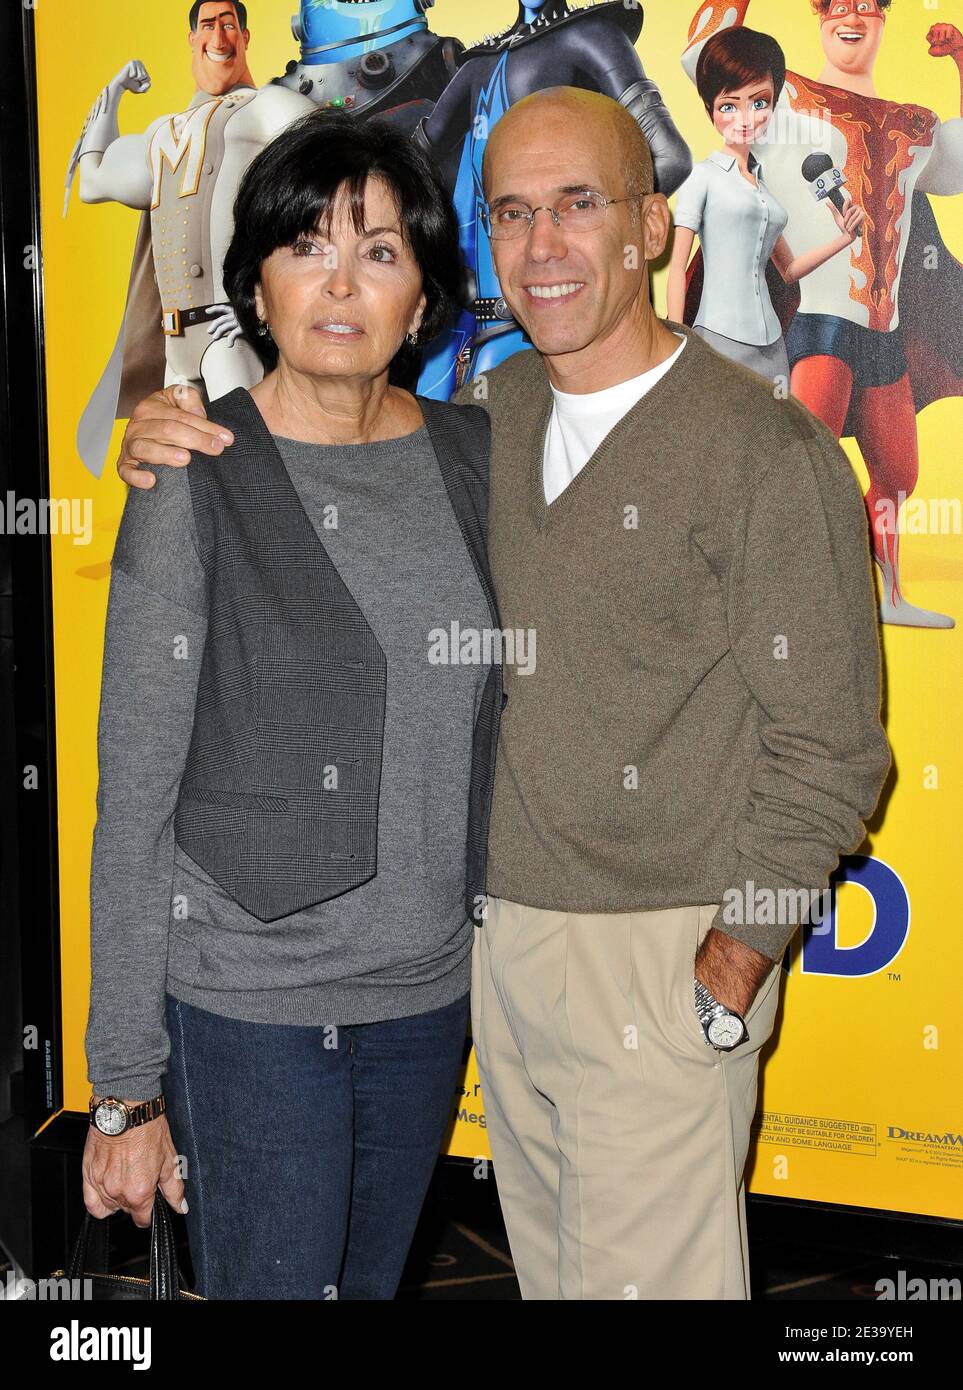 Producer Jeffrey Katzenberg and wife Marilyn arriving for the premiere of Dreamorks Pictures' 'Megamind' in Los Angeles, CA, USA on October 30, 2010. Photo by Lionel Hahn/ABACAPRESS.COM Stock Photo